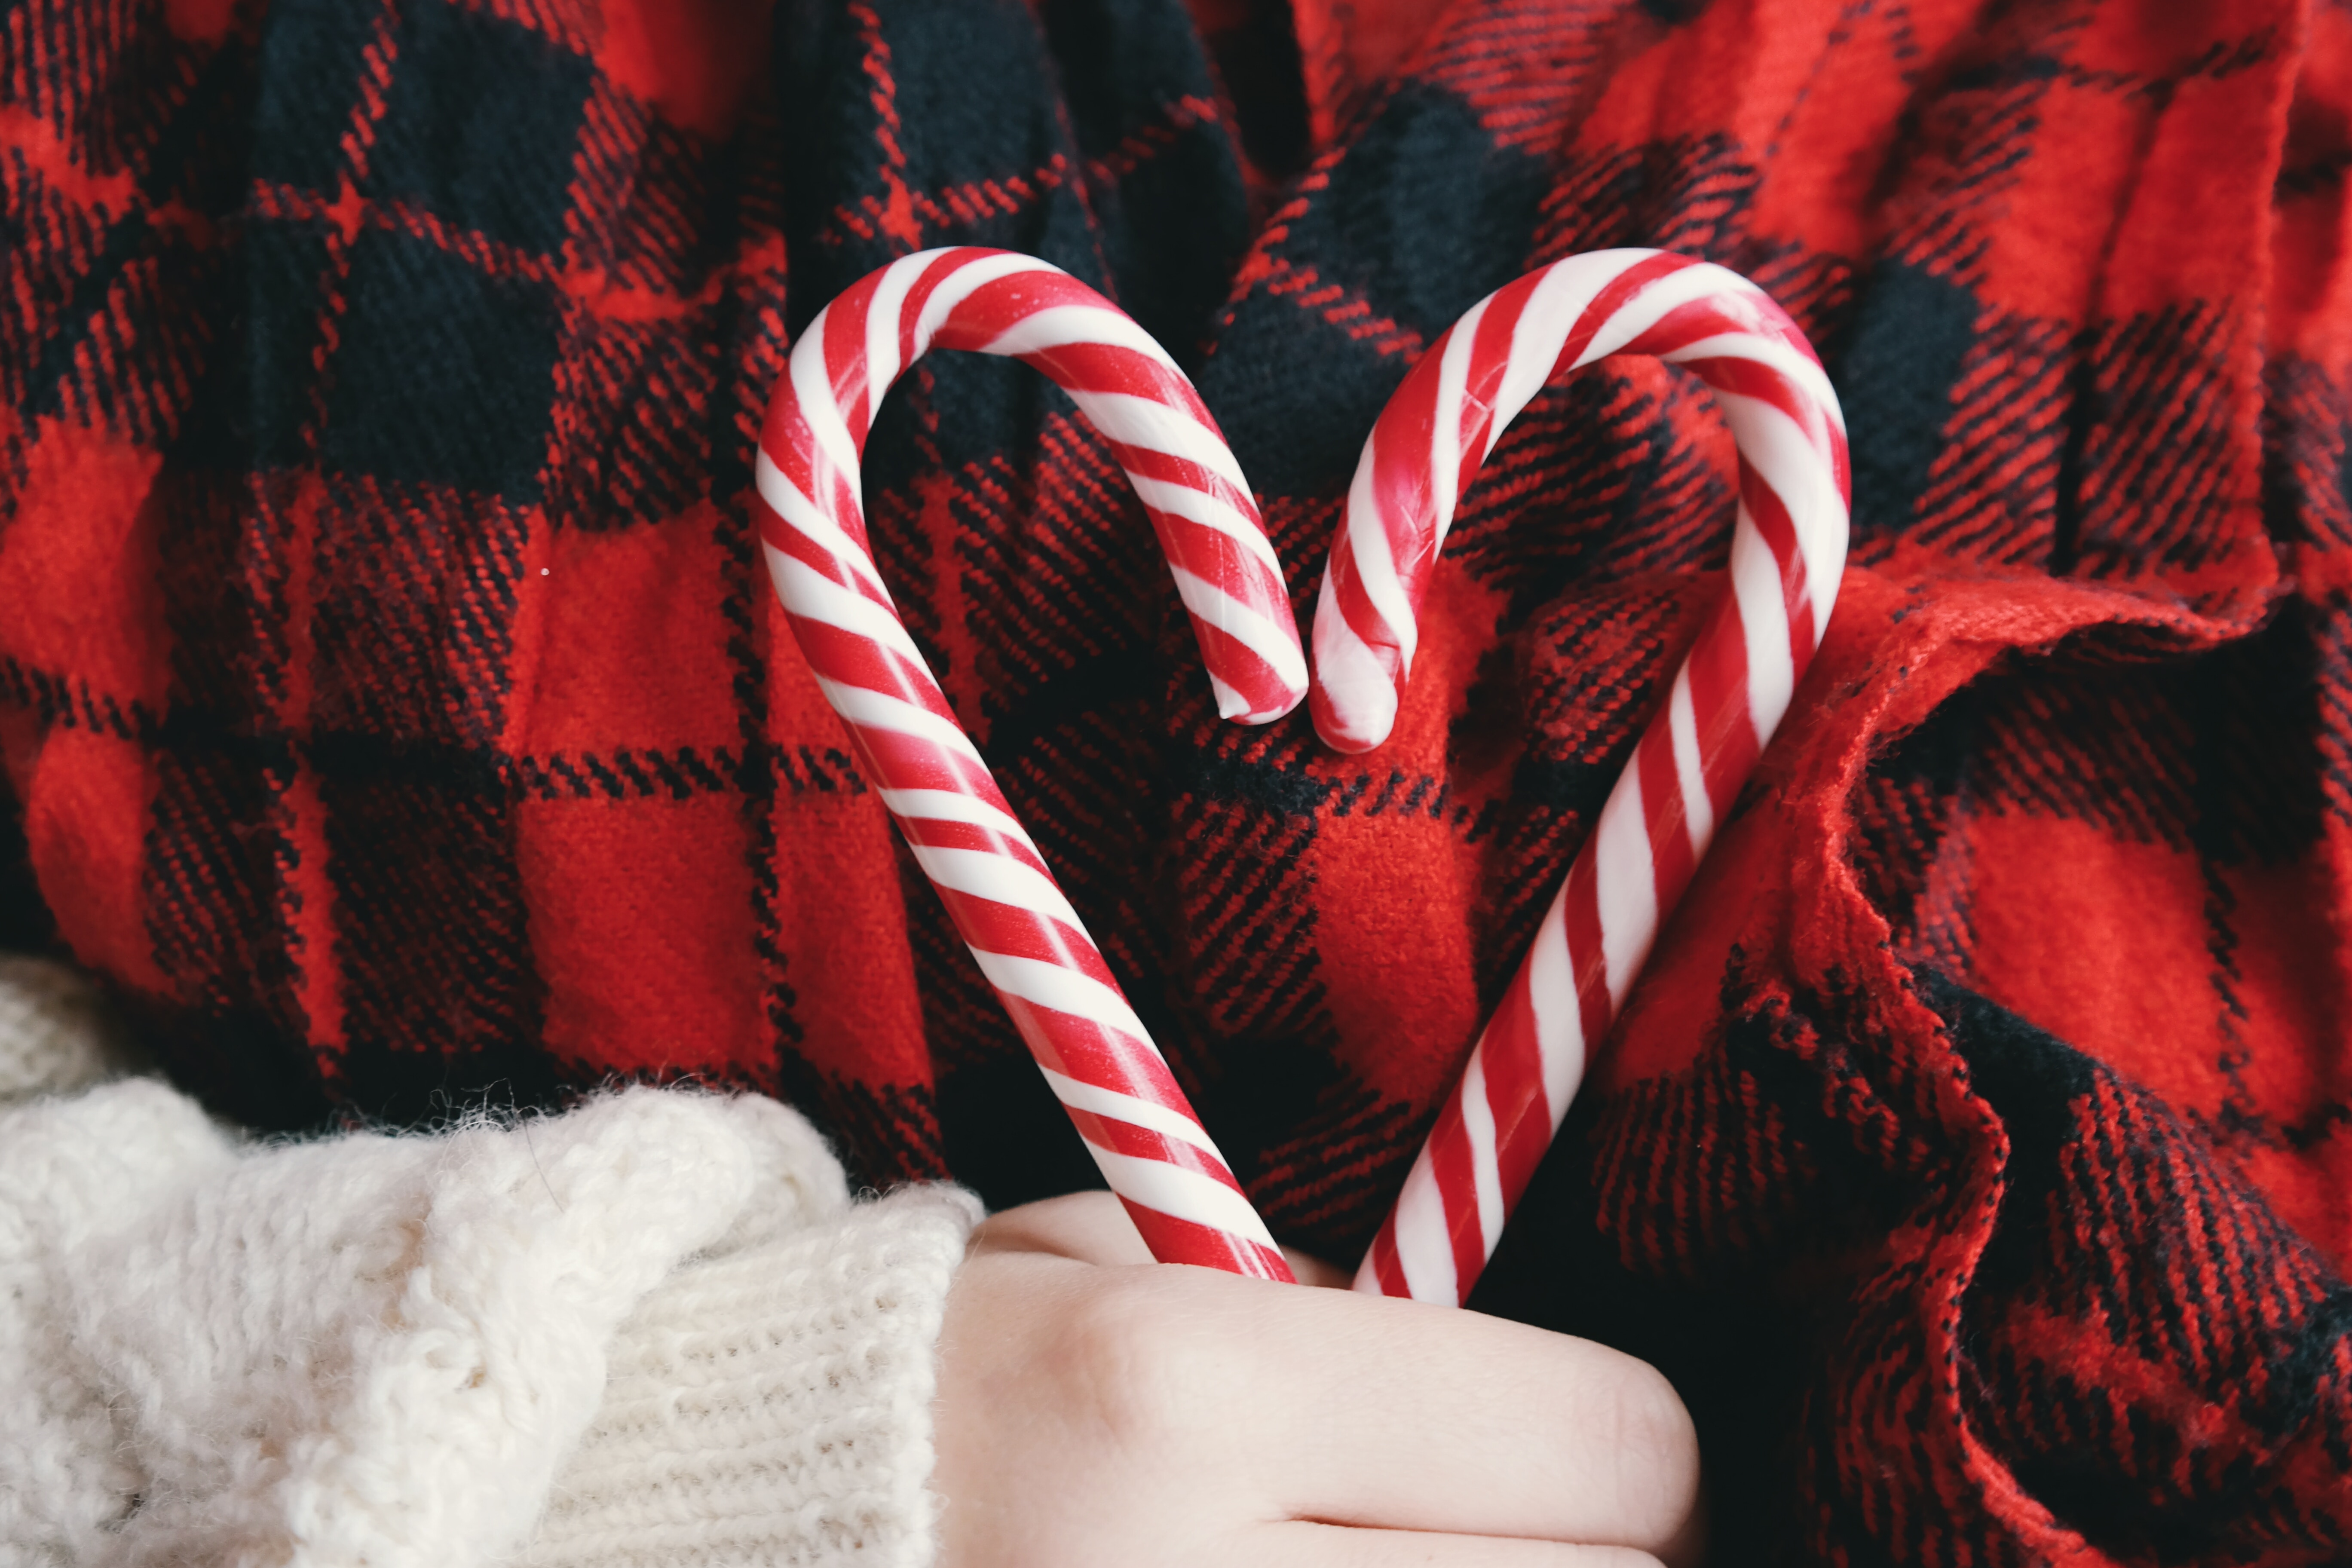 person in red and black checked shirt holding 2 white-and-red candy canes